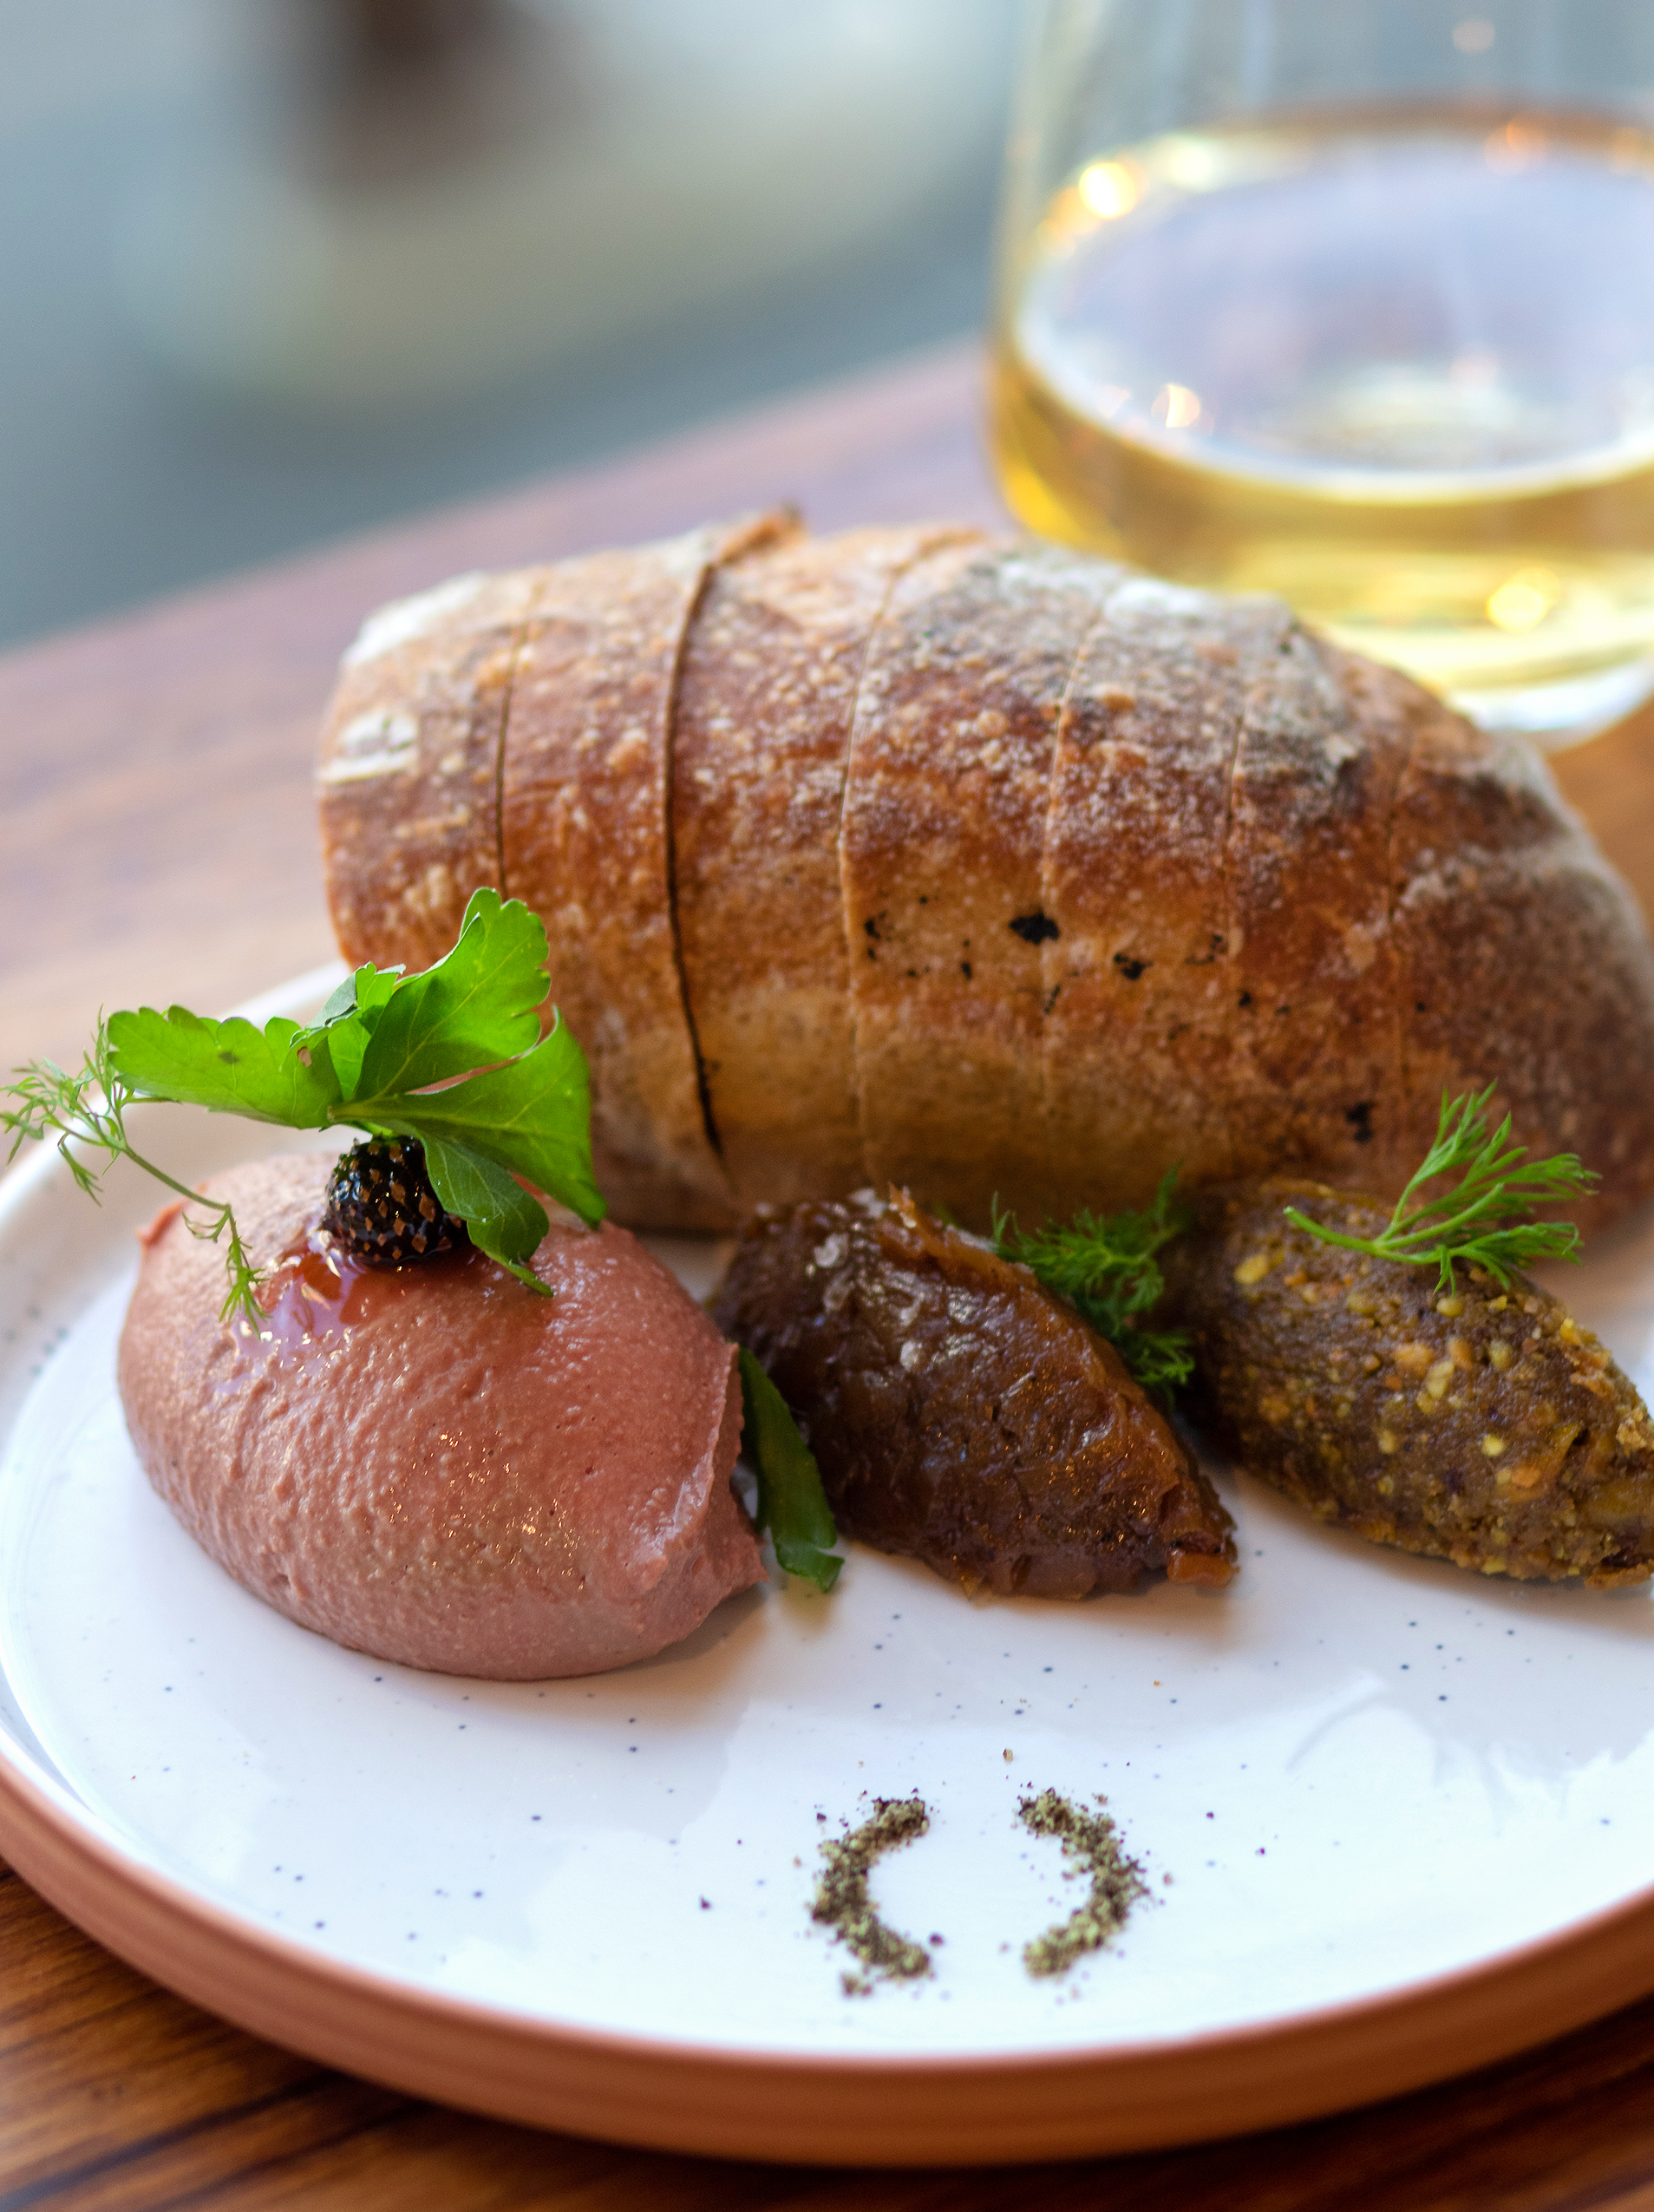 Chicken liver mousse with onion jam on toasted sourdough at Troubadour in Healdsburg. (Heather Irwin/Sonoma Magazine)